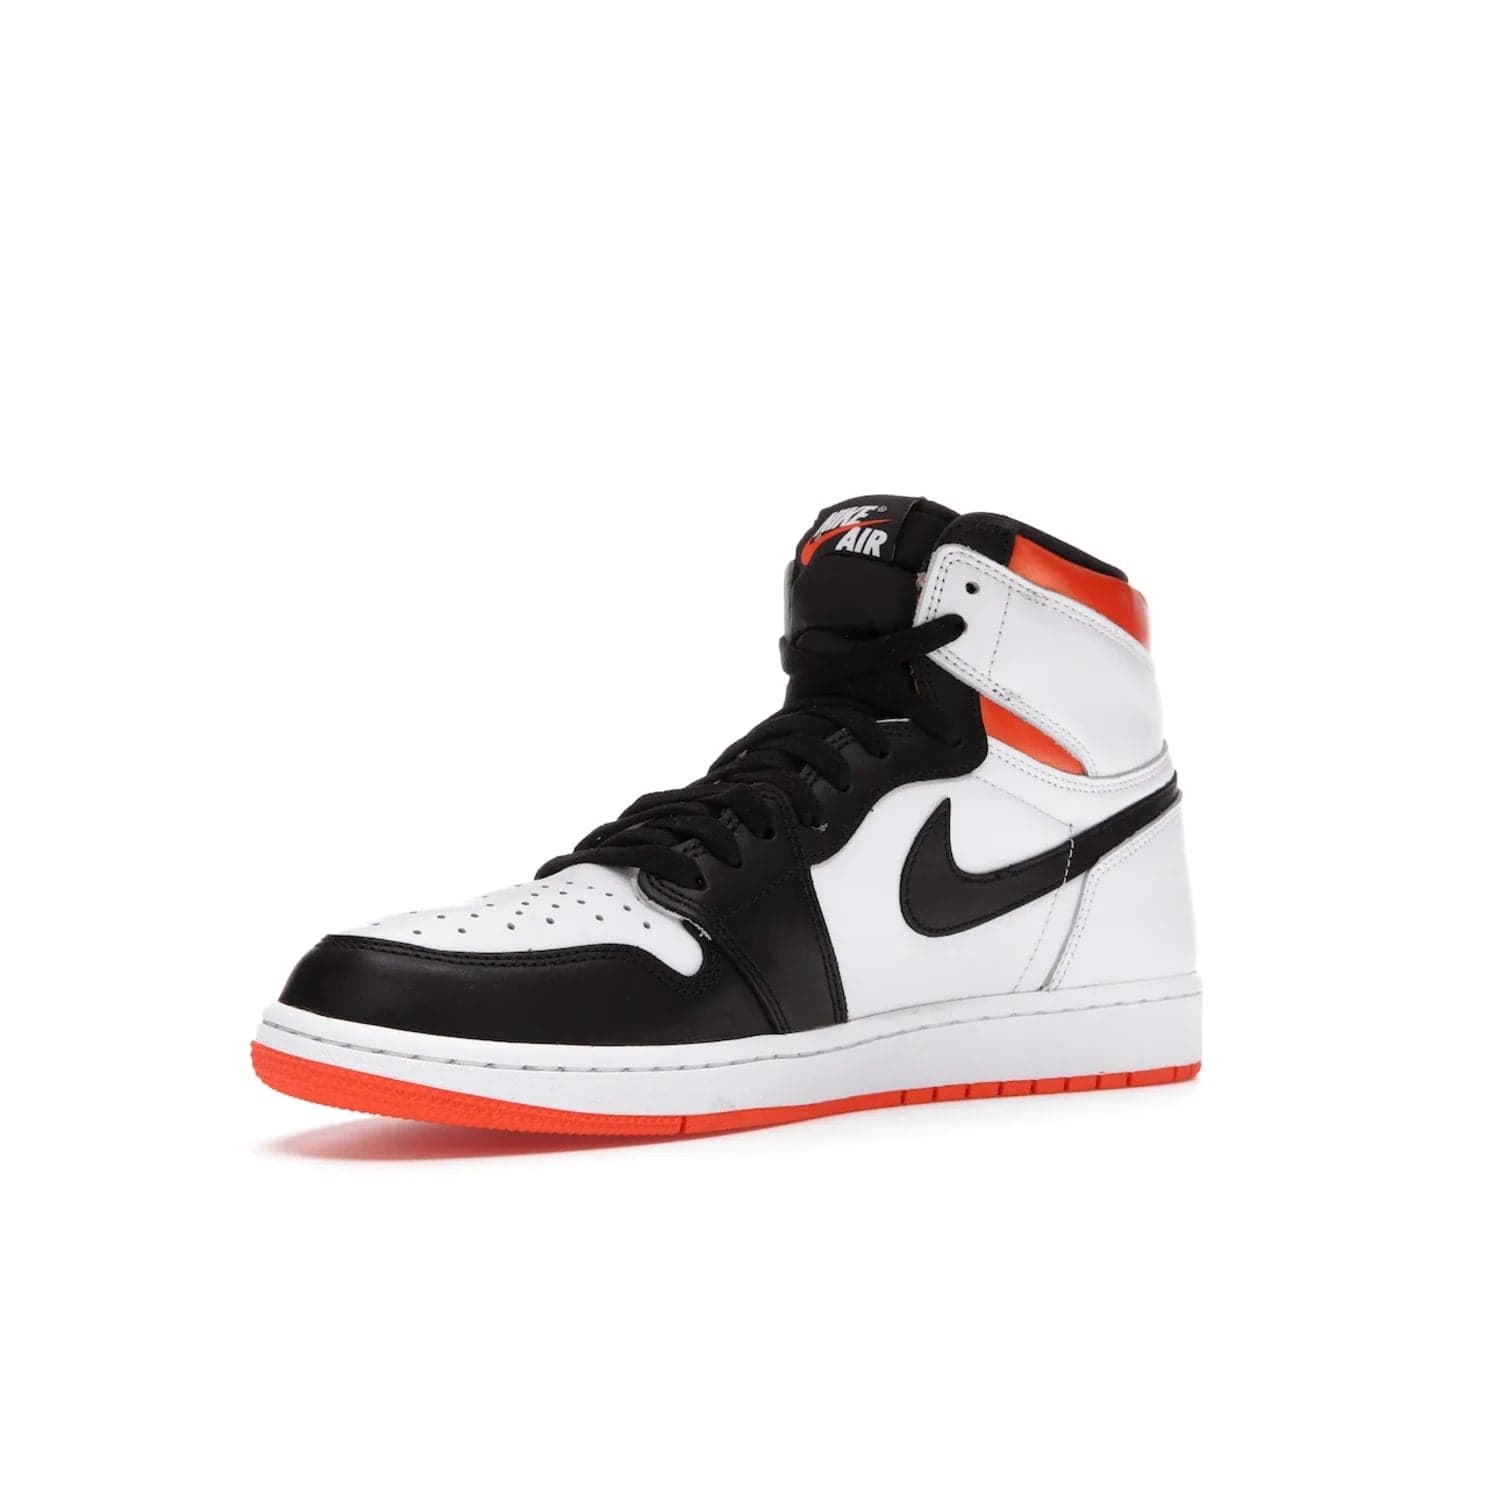 Jordan 1 Retro High Electro Orange - Image 15 - Only at www.BallersClubKickz.com - This Air Jordan 1 Retro High Electro Orange features a white leather upper with black overlays and vibrant Hyper Orange ankle wrap. Turn heads with this iconic design of woven tongue label and sole. Get yours today and add some serious style to your rotation.